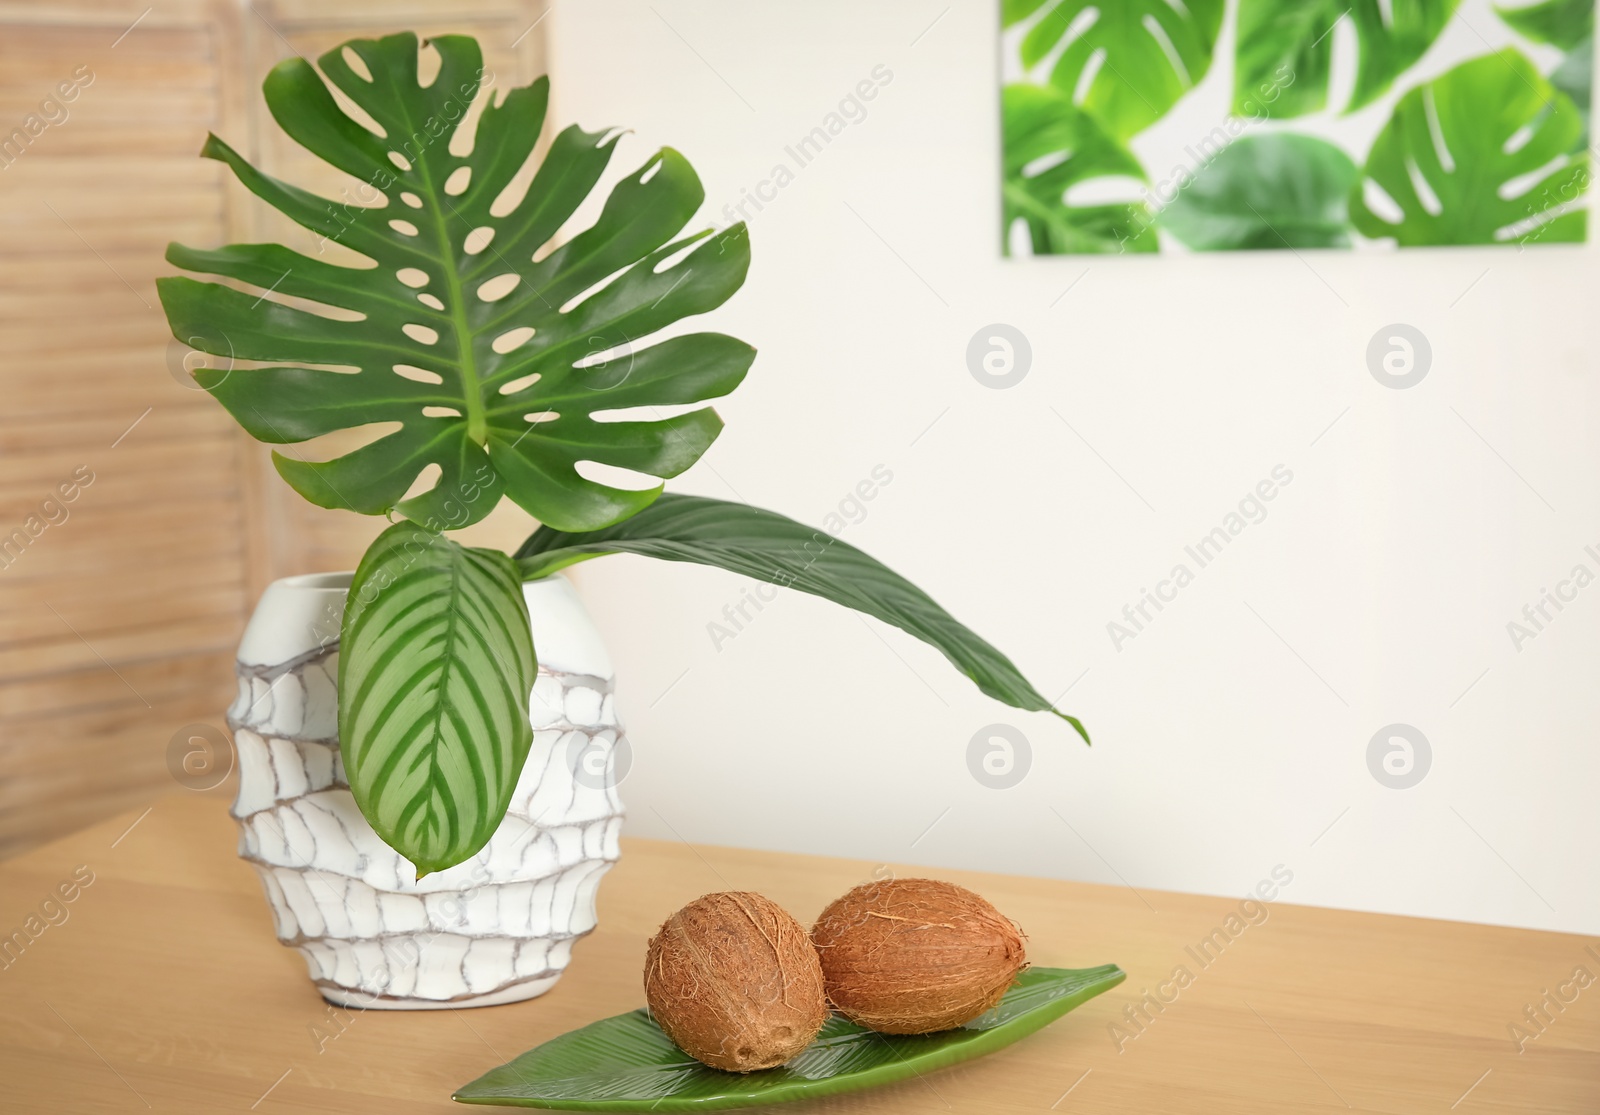 Photo of Vase with tropical leaves on table indoors. Interior design element